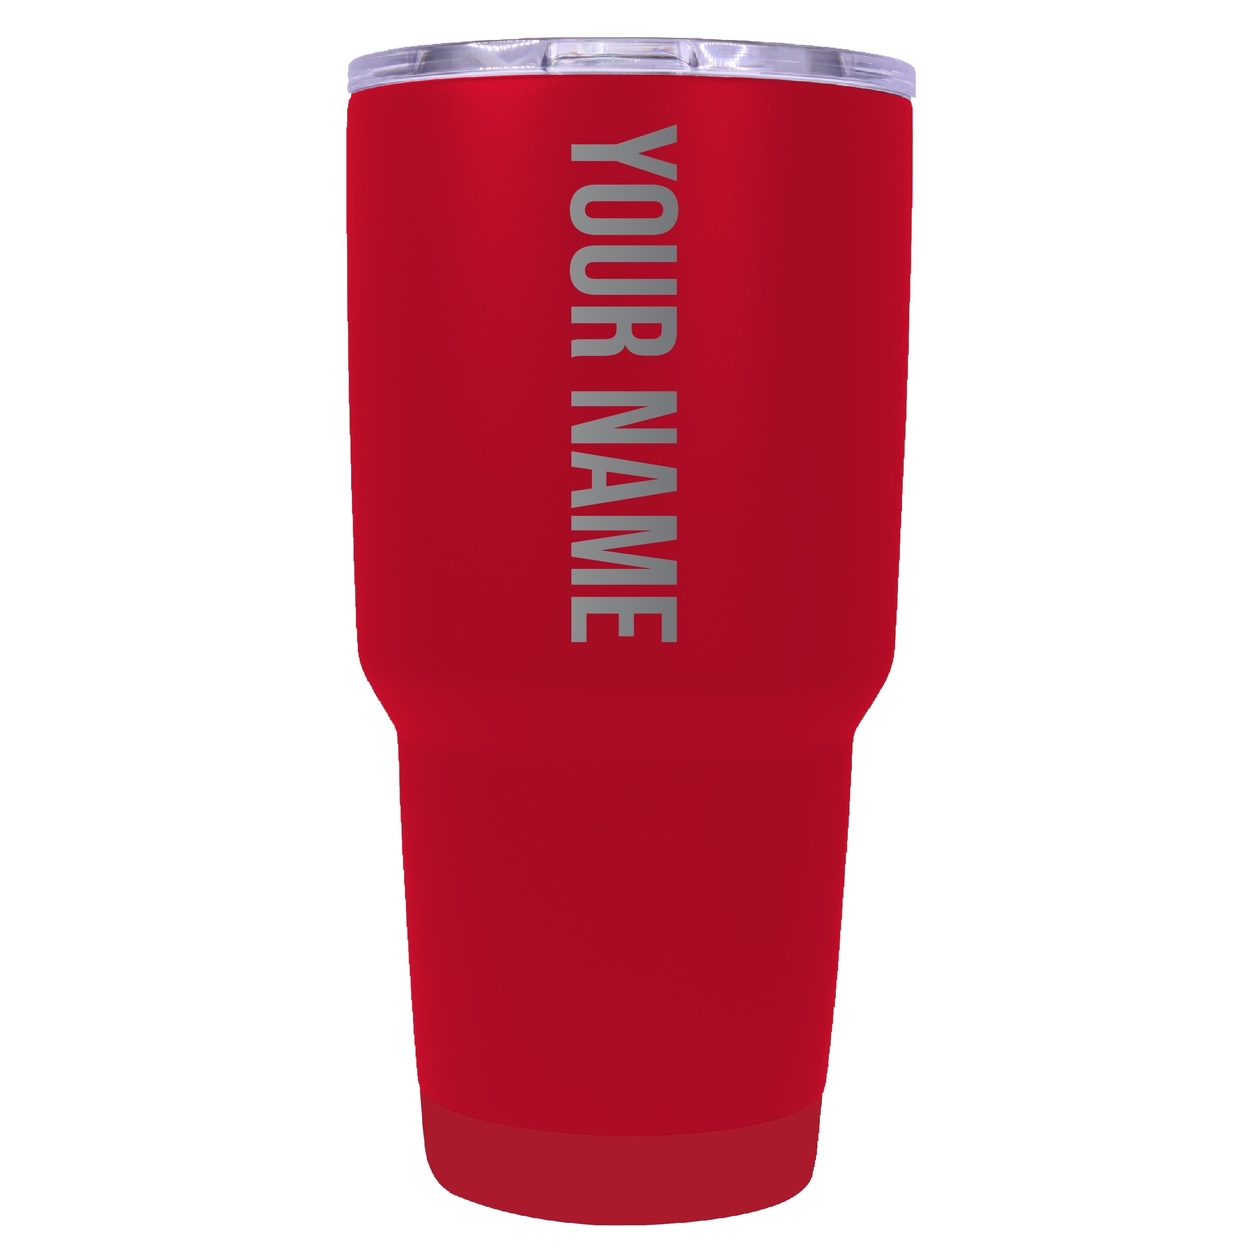 Customizable Laser Etched 24 Oz Insulated Stainless Steel Tumbler Personalized With Custom Name Or Message - Red, 2 Pack